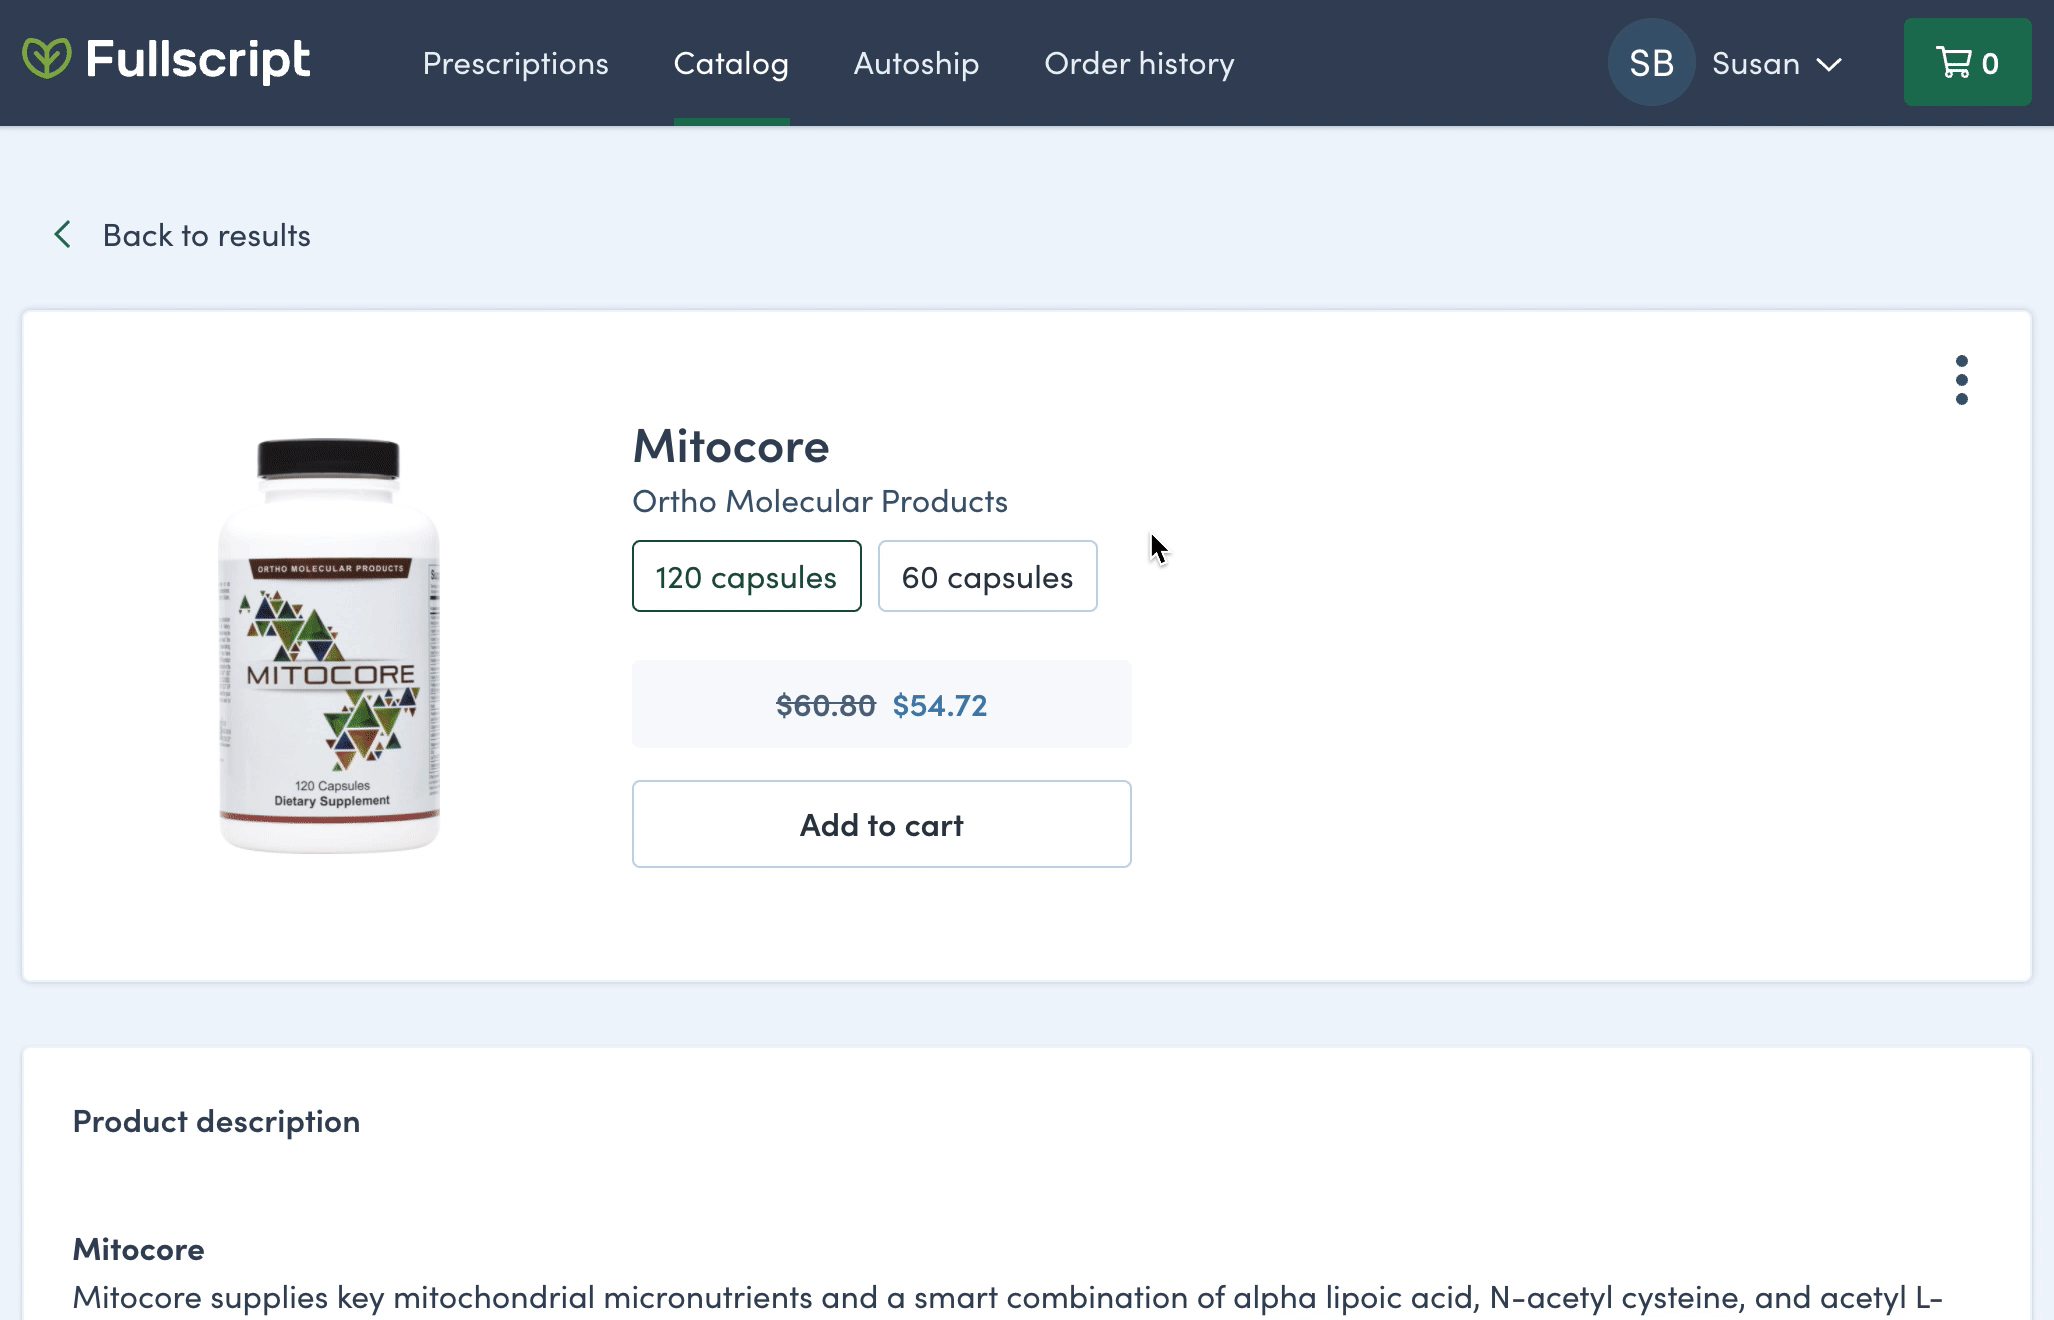 Viewing similar products in the Catalog